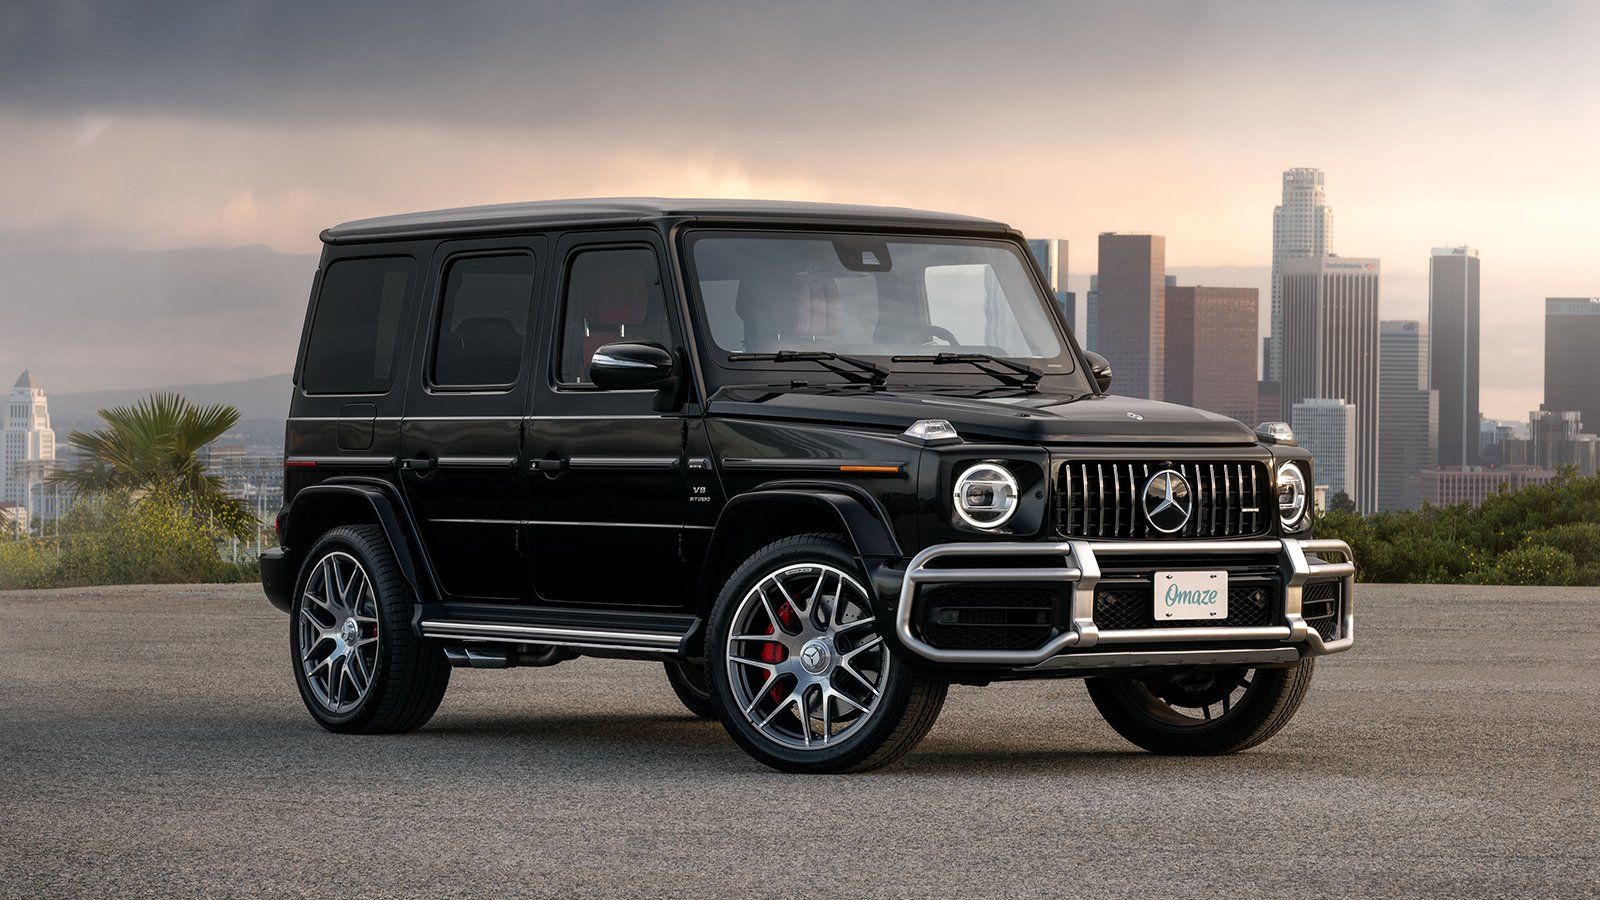 Win Your Own Mercedes Benz® G Wagen With $000 In The Trunk